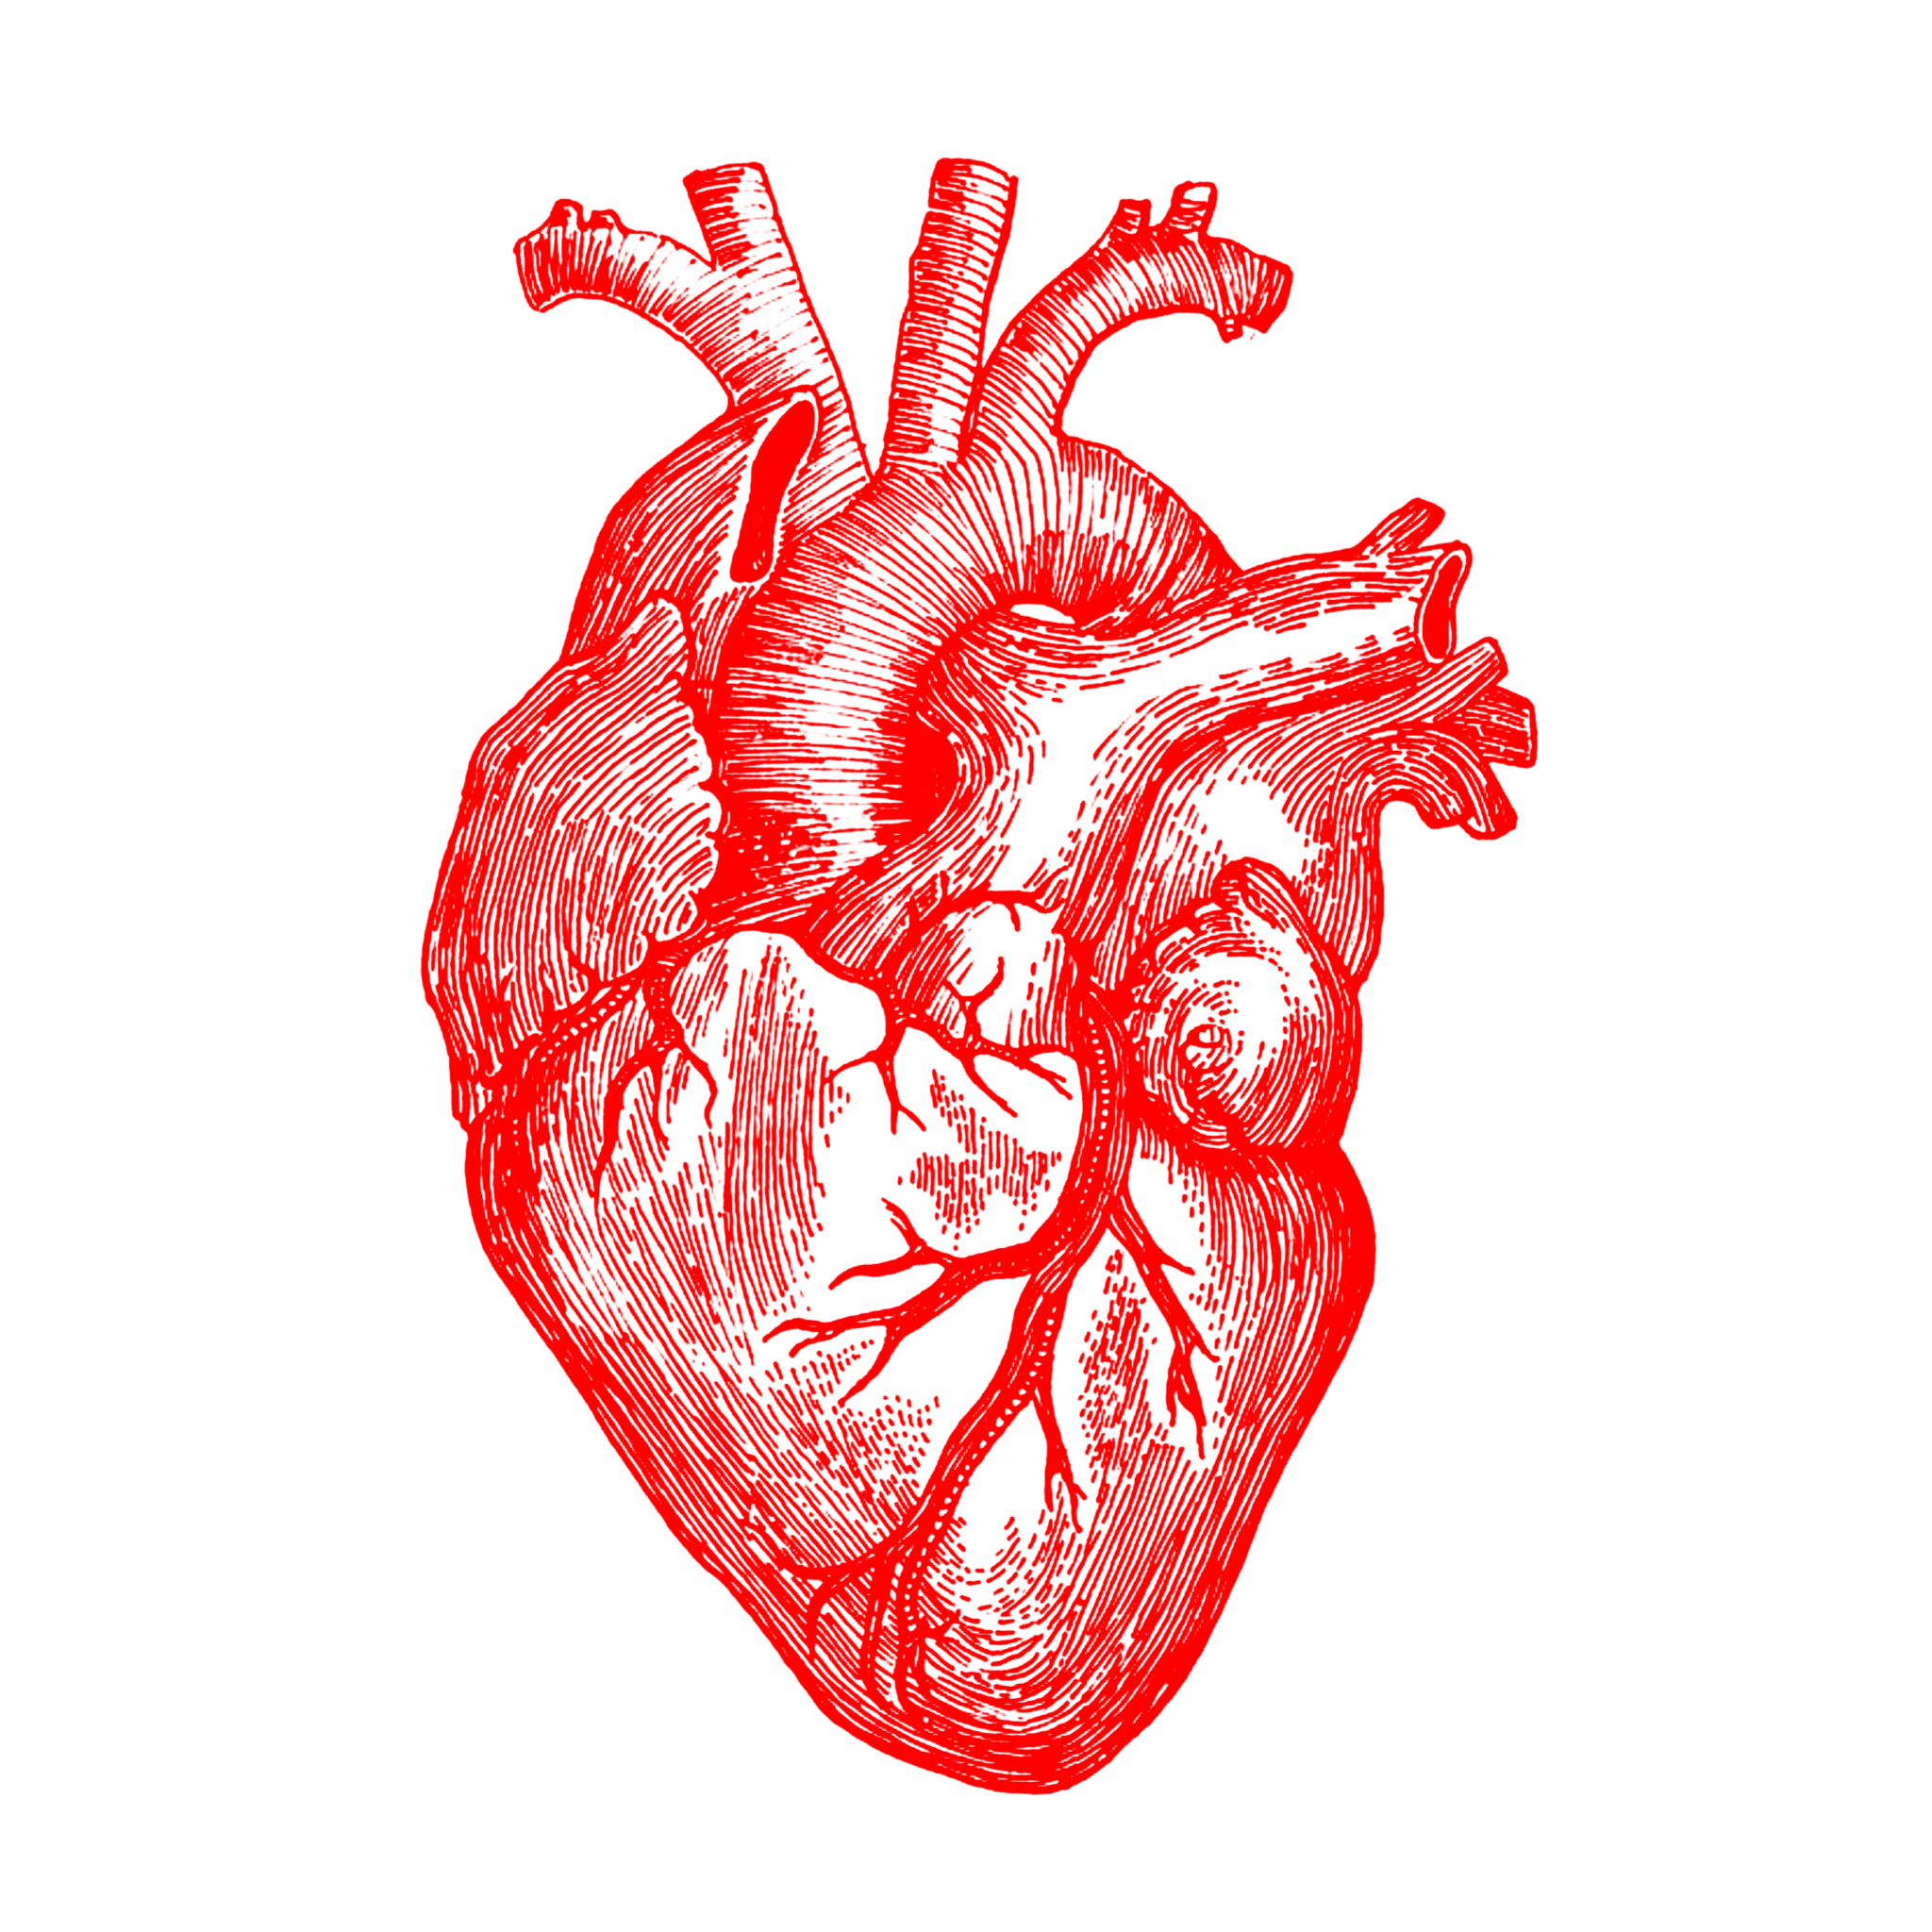 Human Heart PNG Transparent Images Free Download - Pngfre